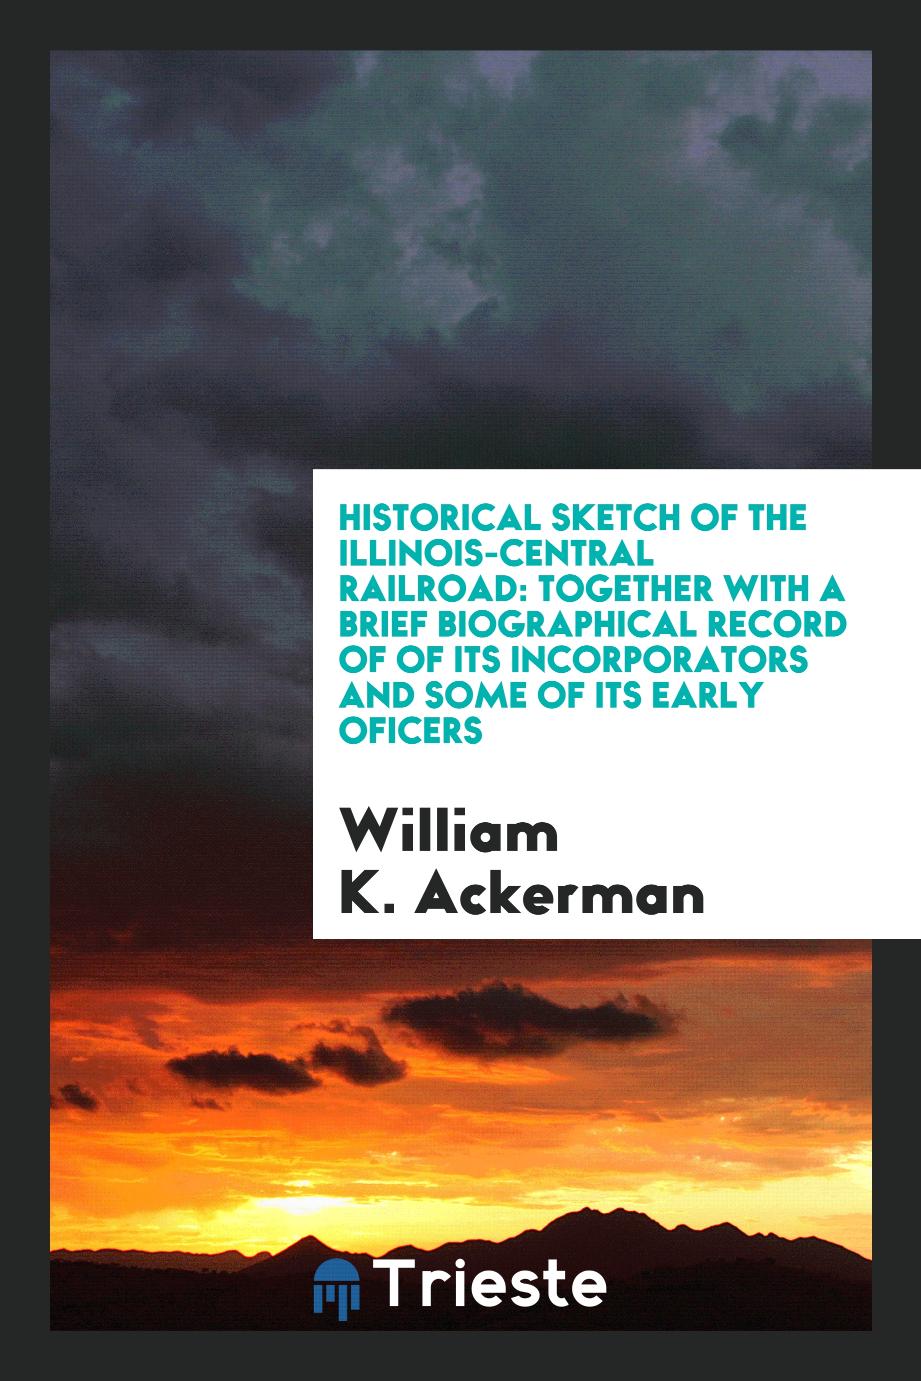 Historical Sketch of the Illinois-Central Railroad: Together with a Brief Biographical Record of of Its Incorporators and Some of Its Early Oficers